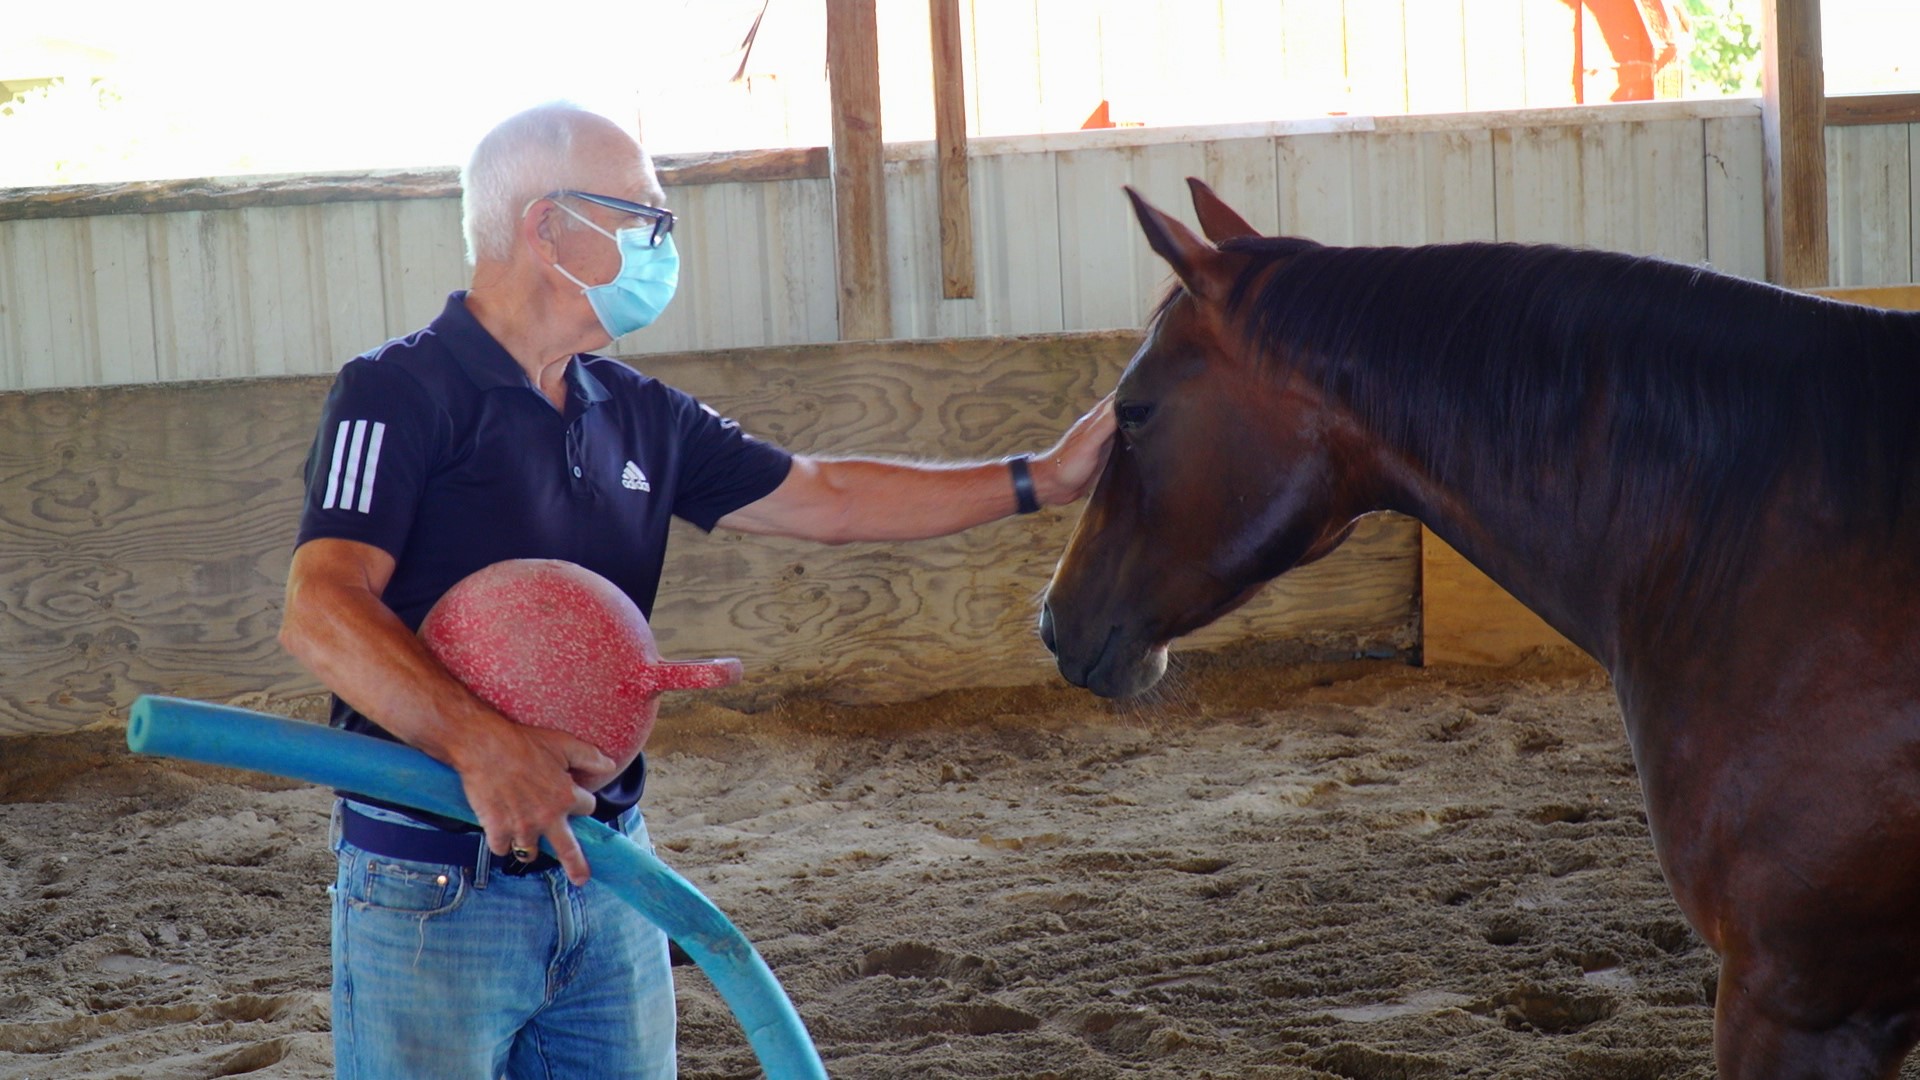 Hooves and halters provide a new kind of therapy at Freedom Equine Connection in Dixon.